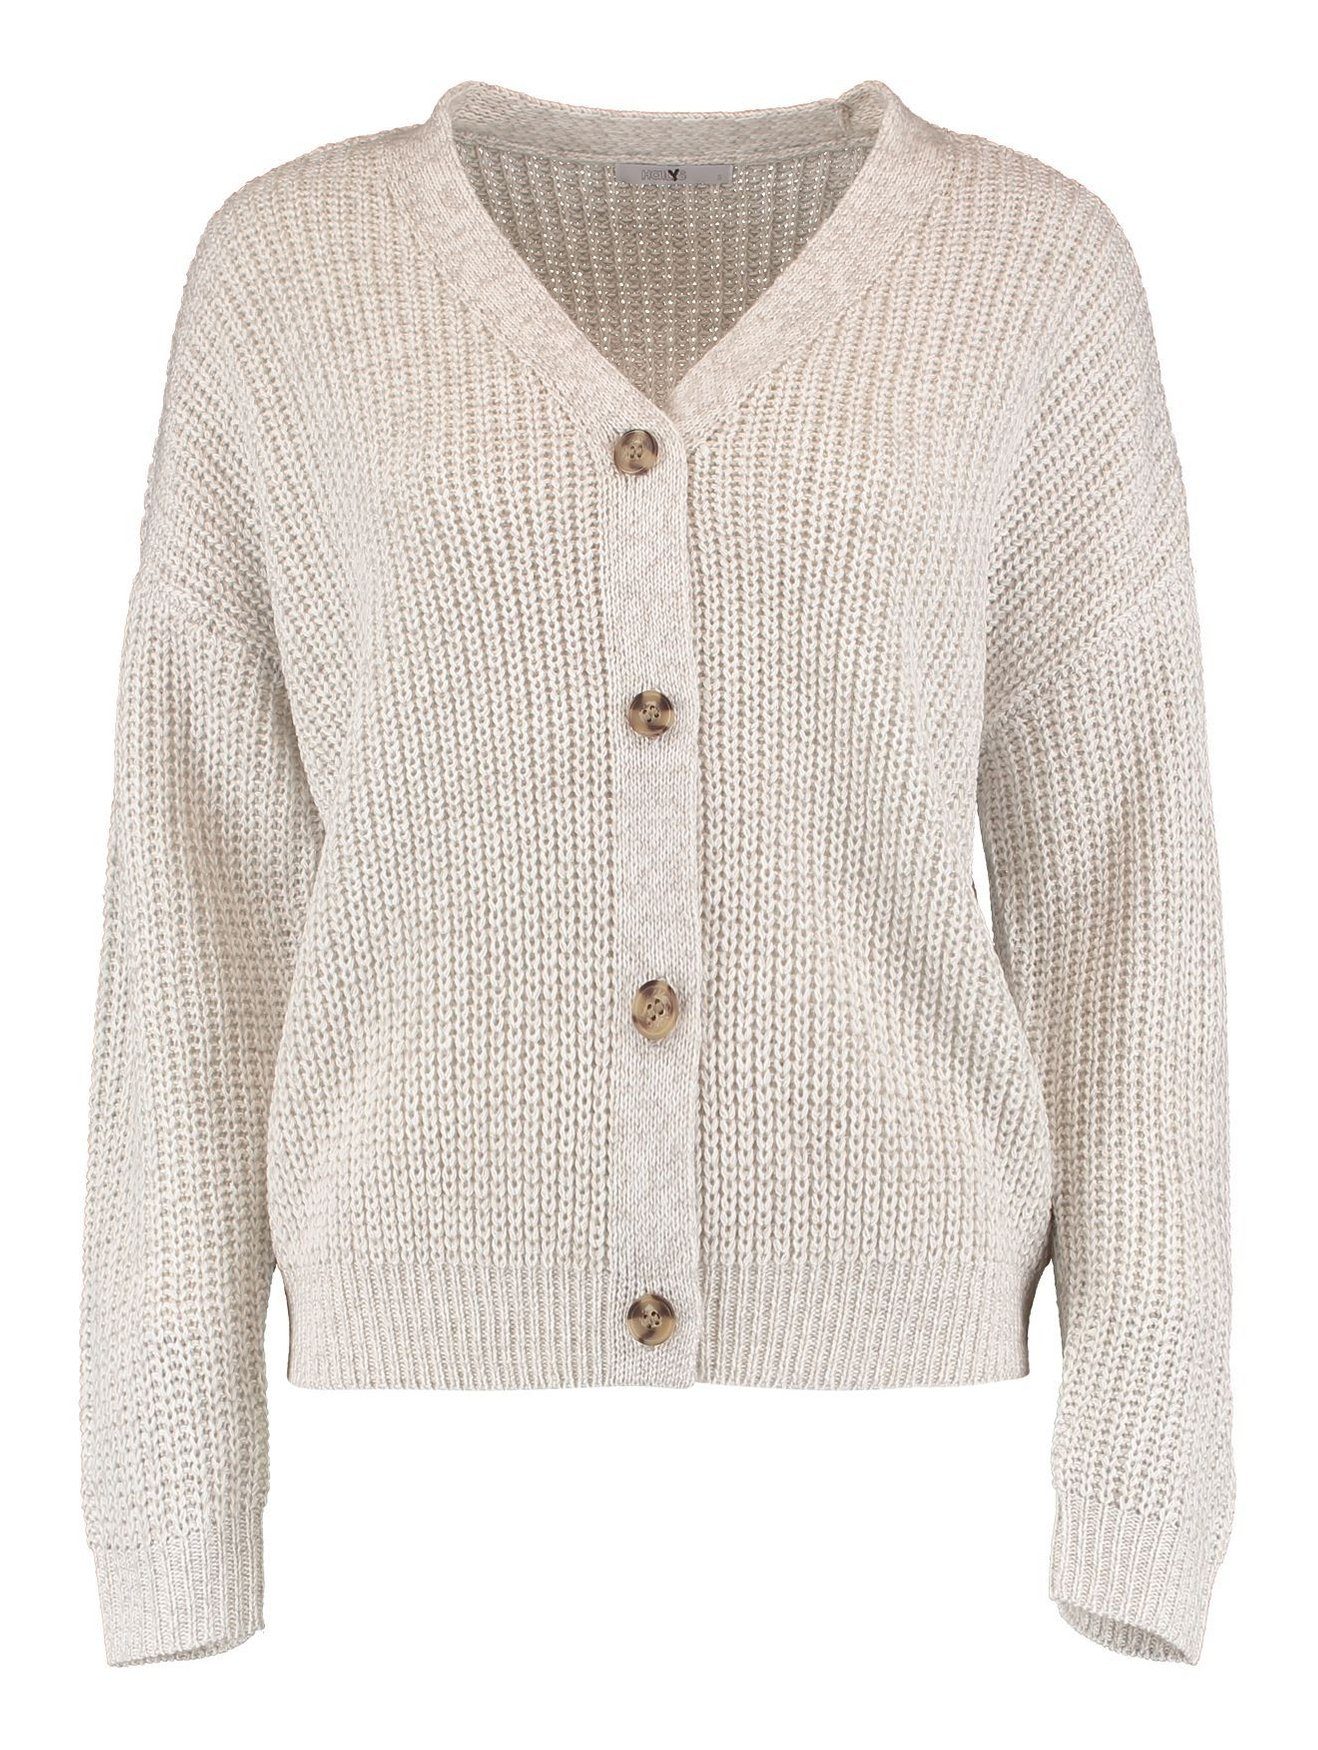 HaILY’S Cardigan Strickjacke Knitted Stretch Cardigan Pi44pa 5923 in Beige